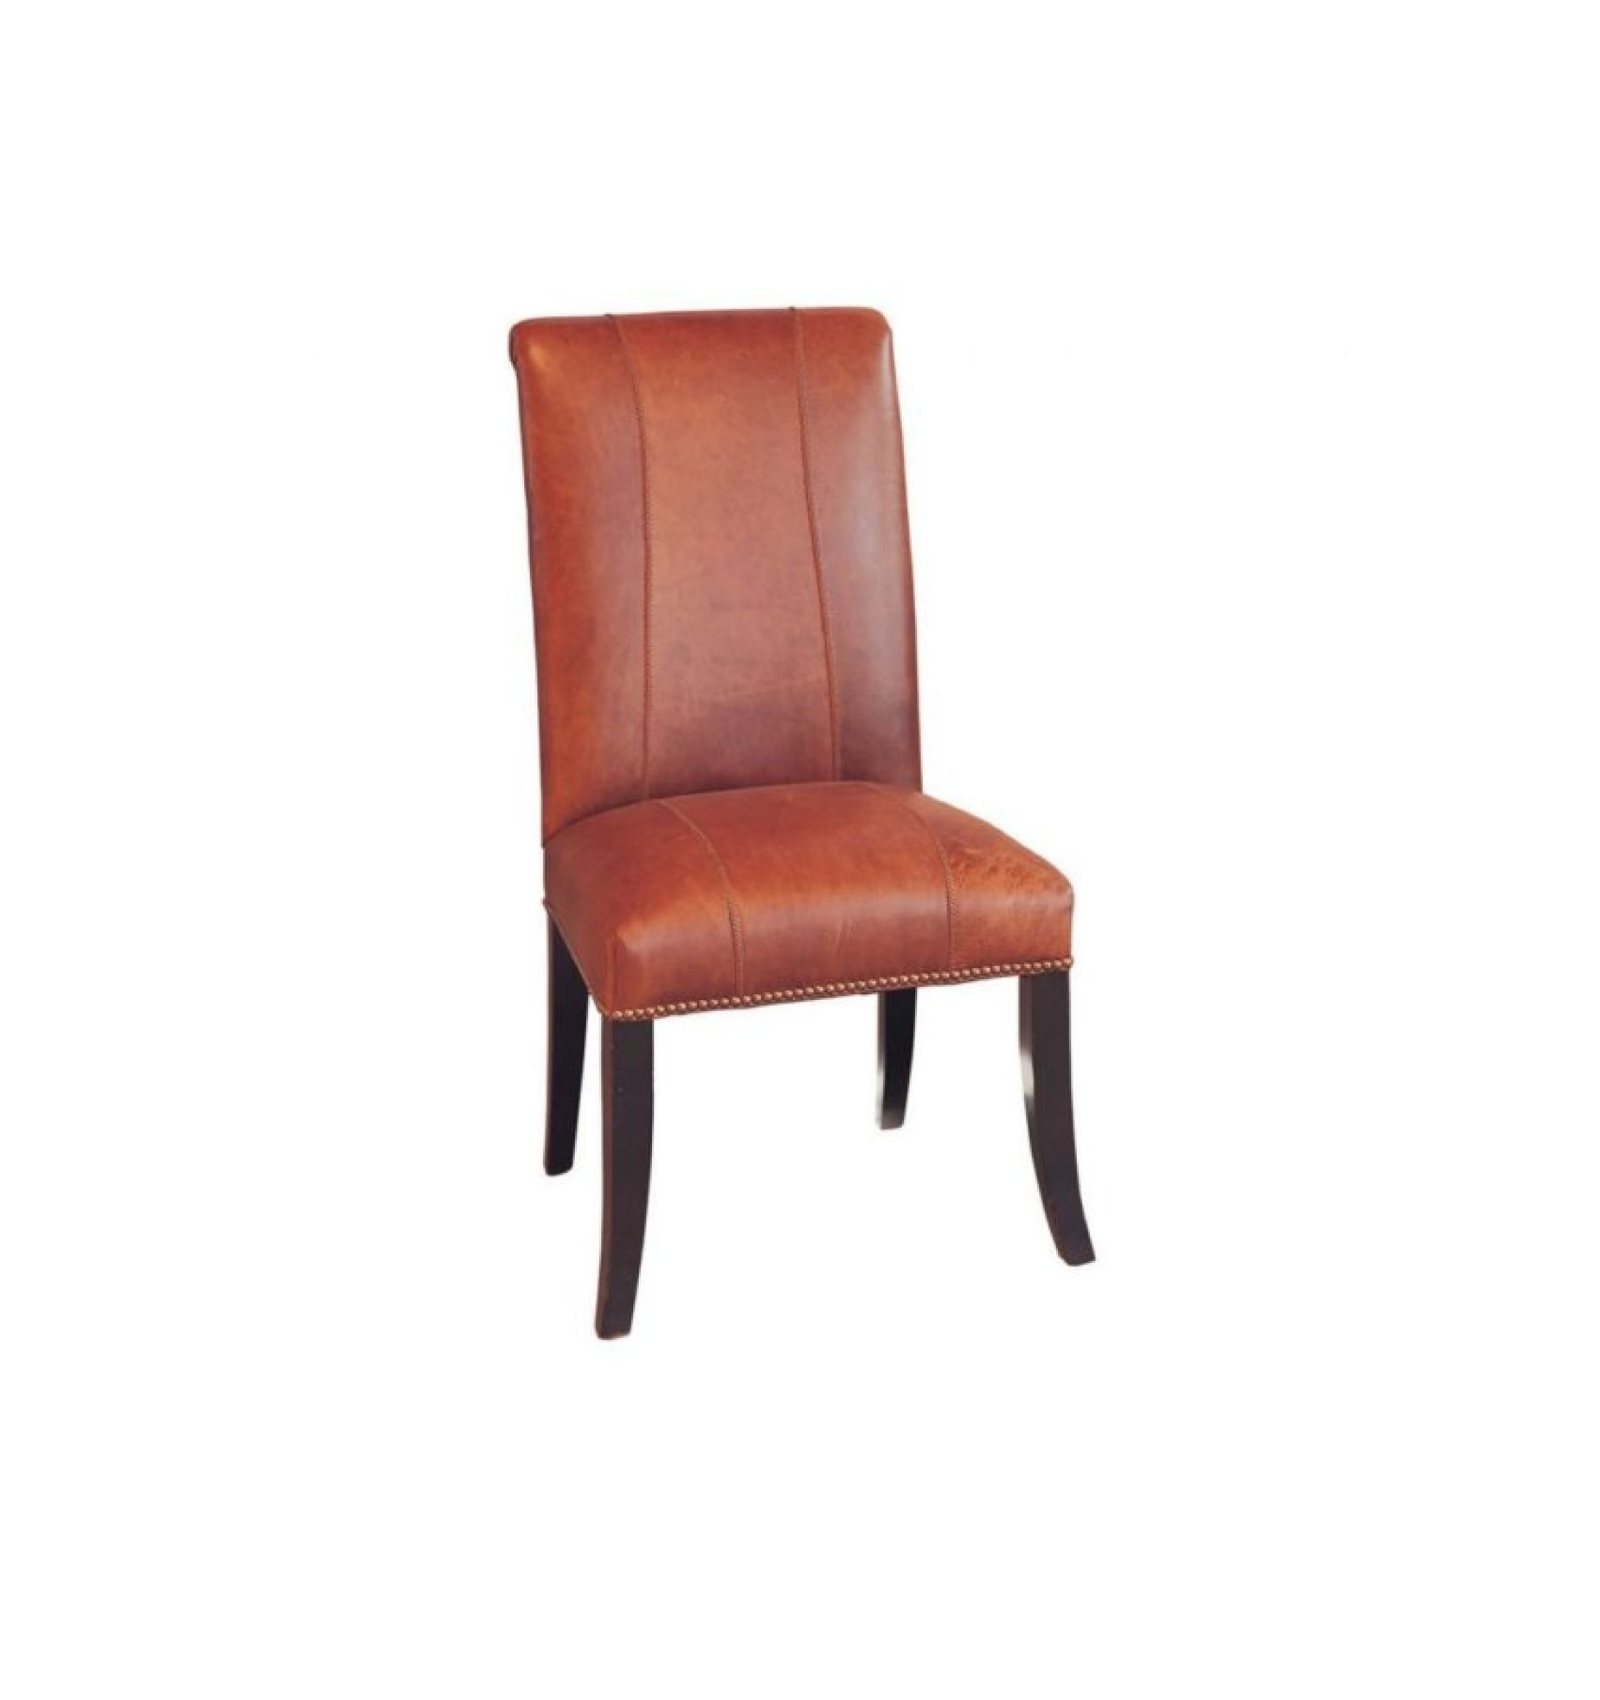 Radcliff Chair